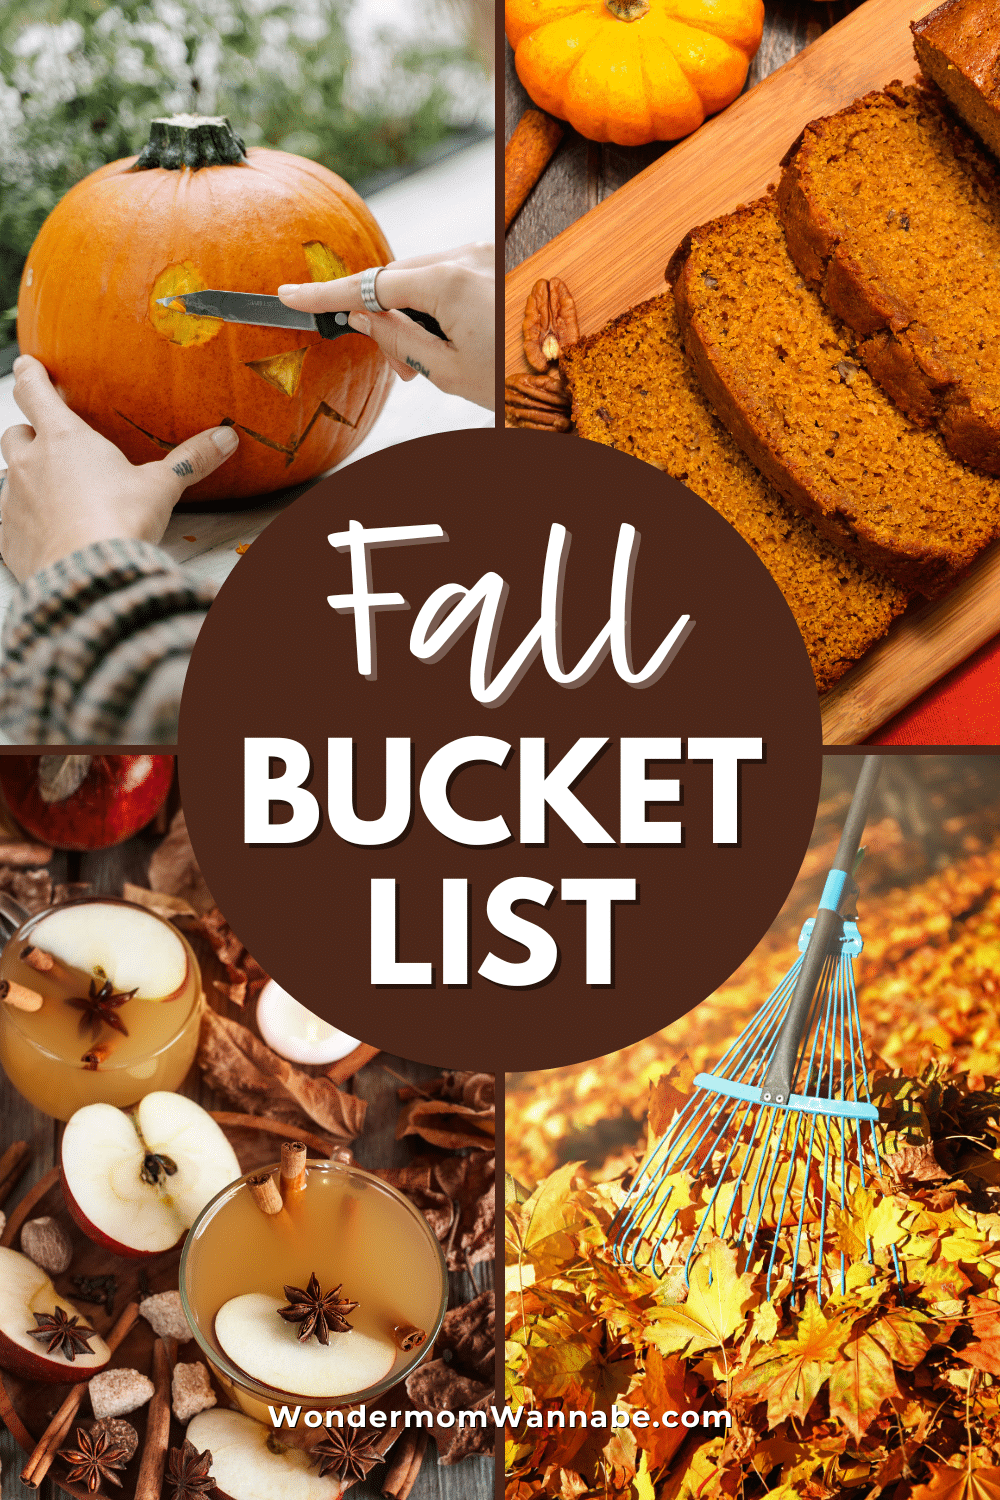 A fall bucket list collage with text.